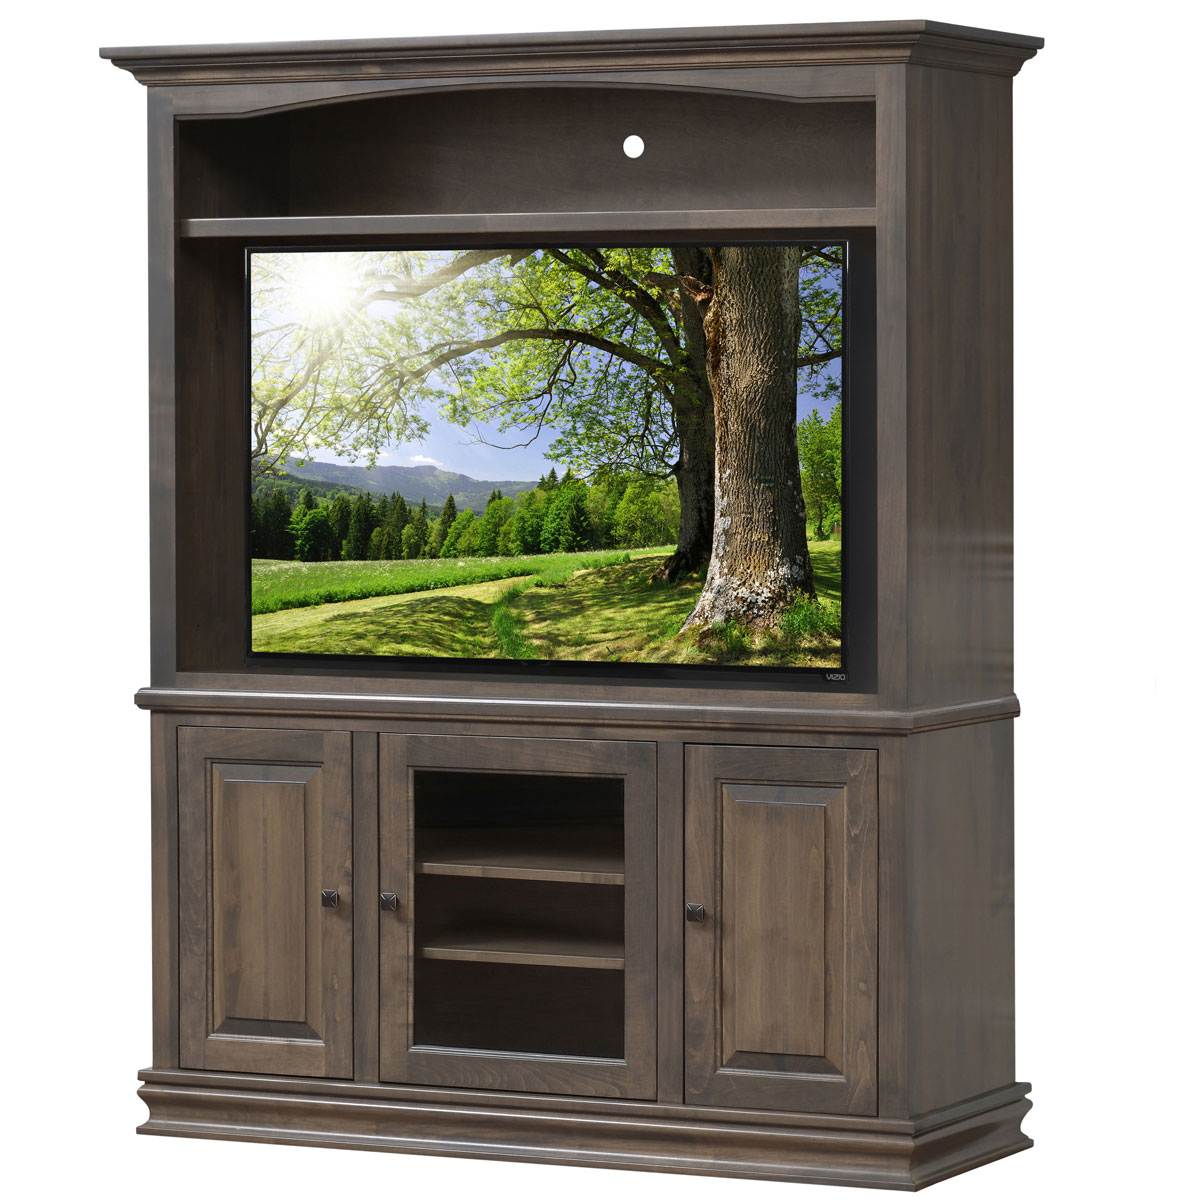 Burlington Entertainment Center shown in Brown Maple with OCS-121 Smoke Finish.